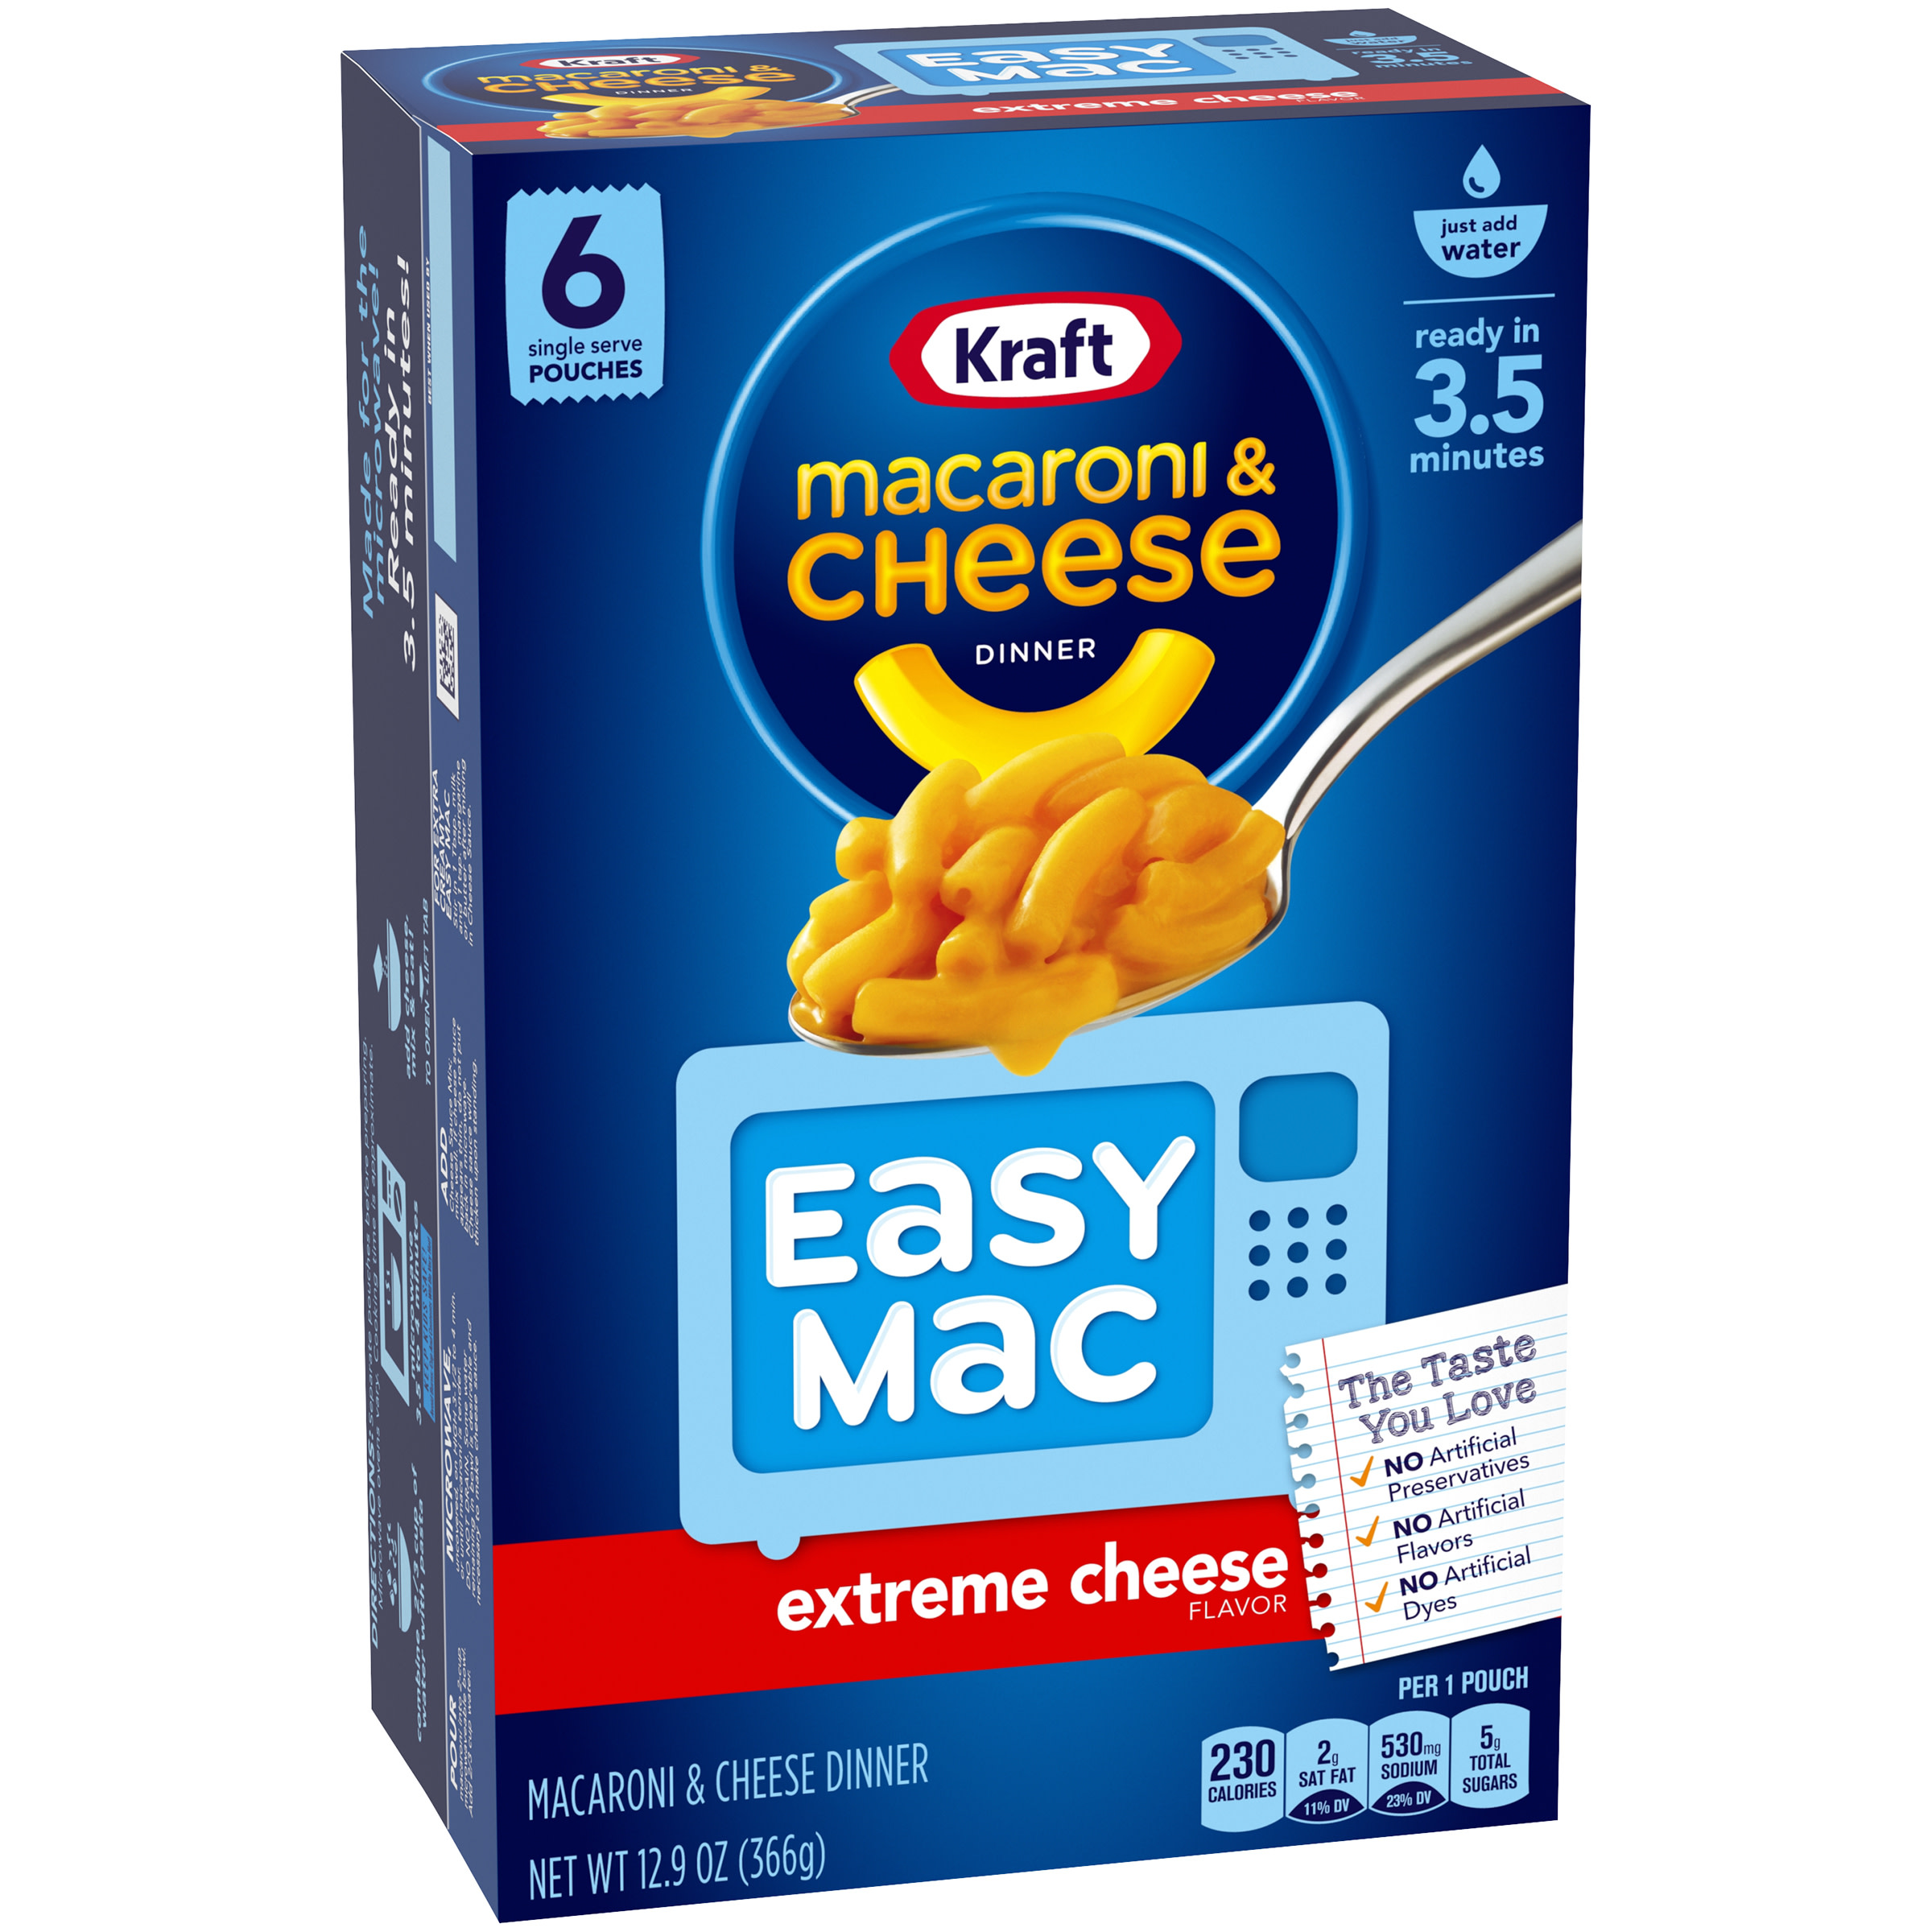 Kraft Easy Mac Extreme Cheese Mac N Cheese Macaroni and Cheese Microwavable Dinner, 6 ct Packets - image 3 of 8